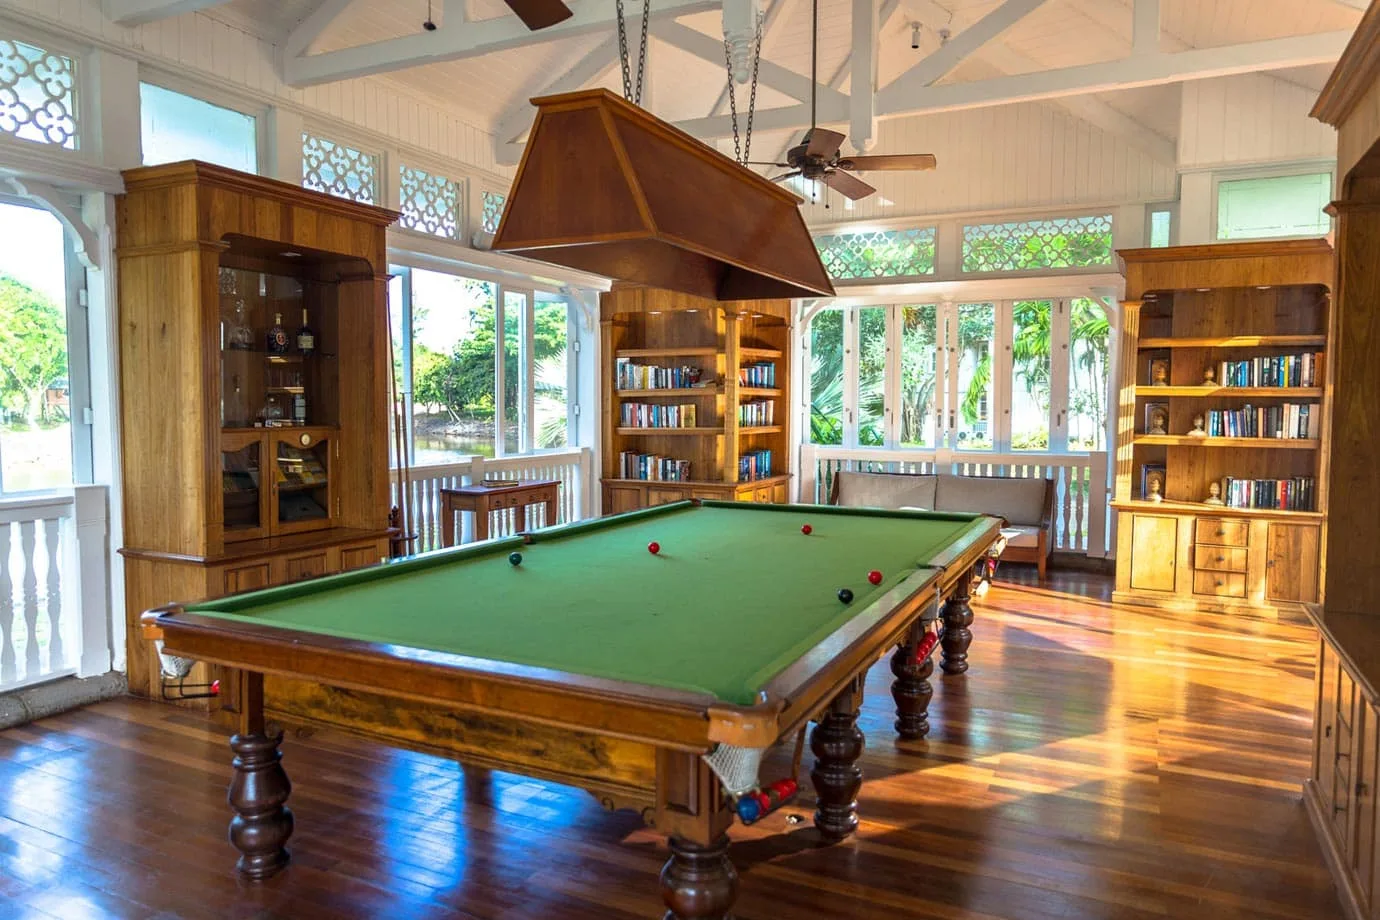 Snooker table at Heritage le Telfair